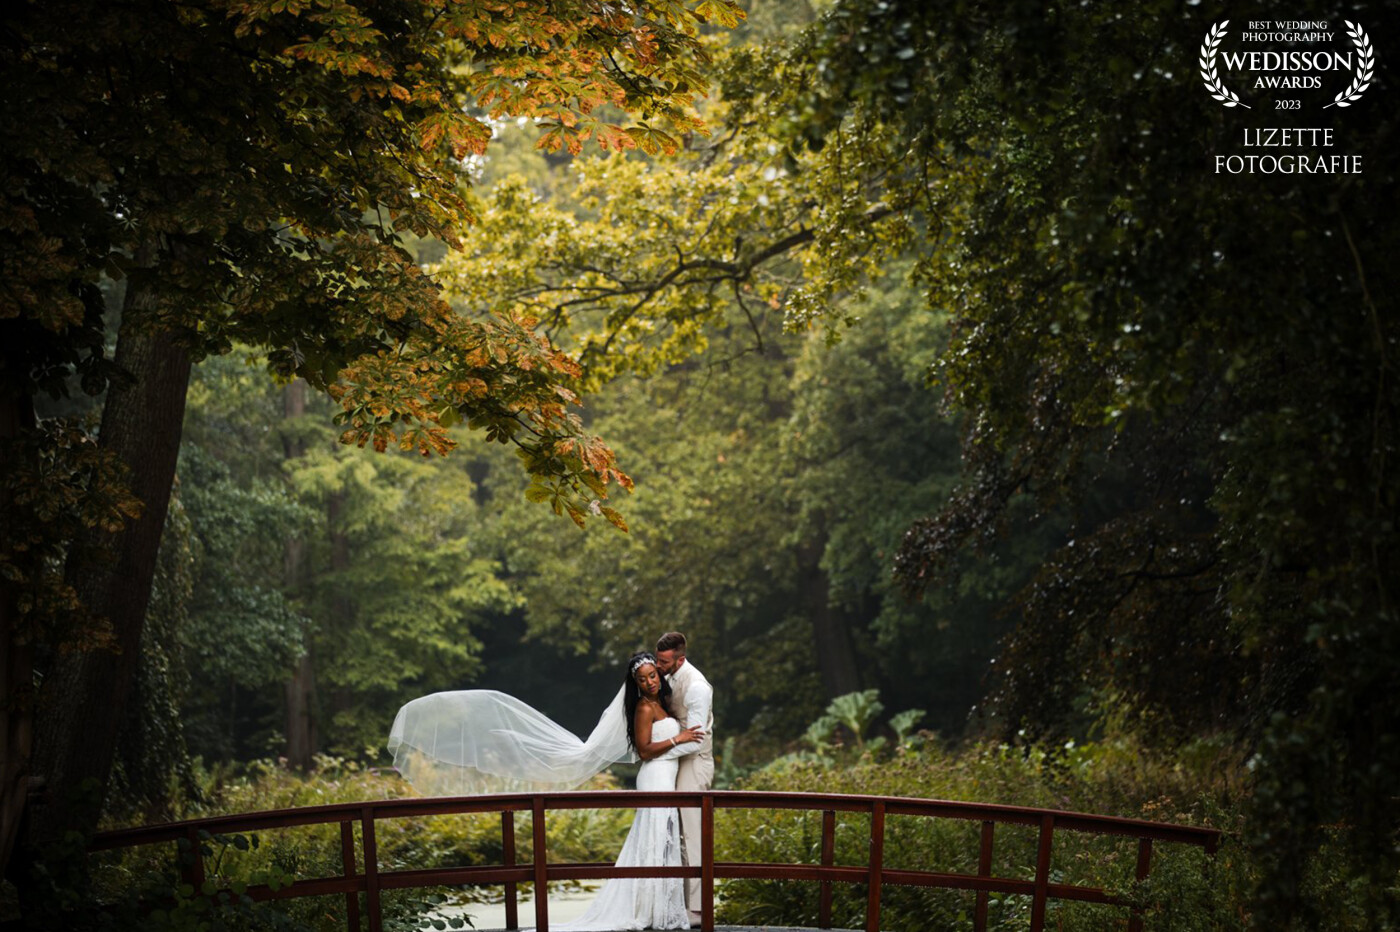 Beautiful autumn wedding in September at Te Werve in Rijswijk (The Netherlands) , lovely couple in the garden of the castle